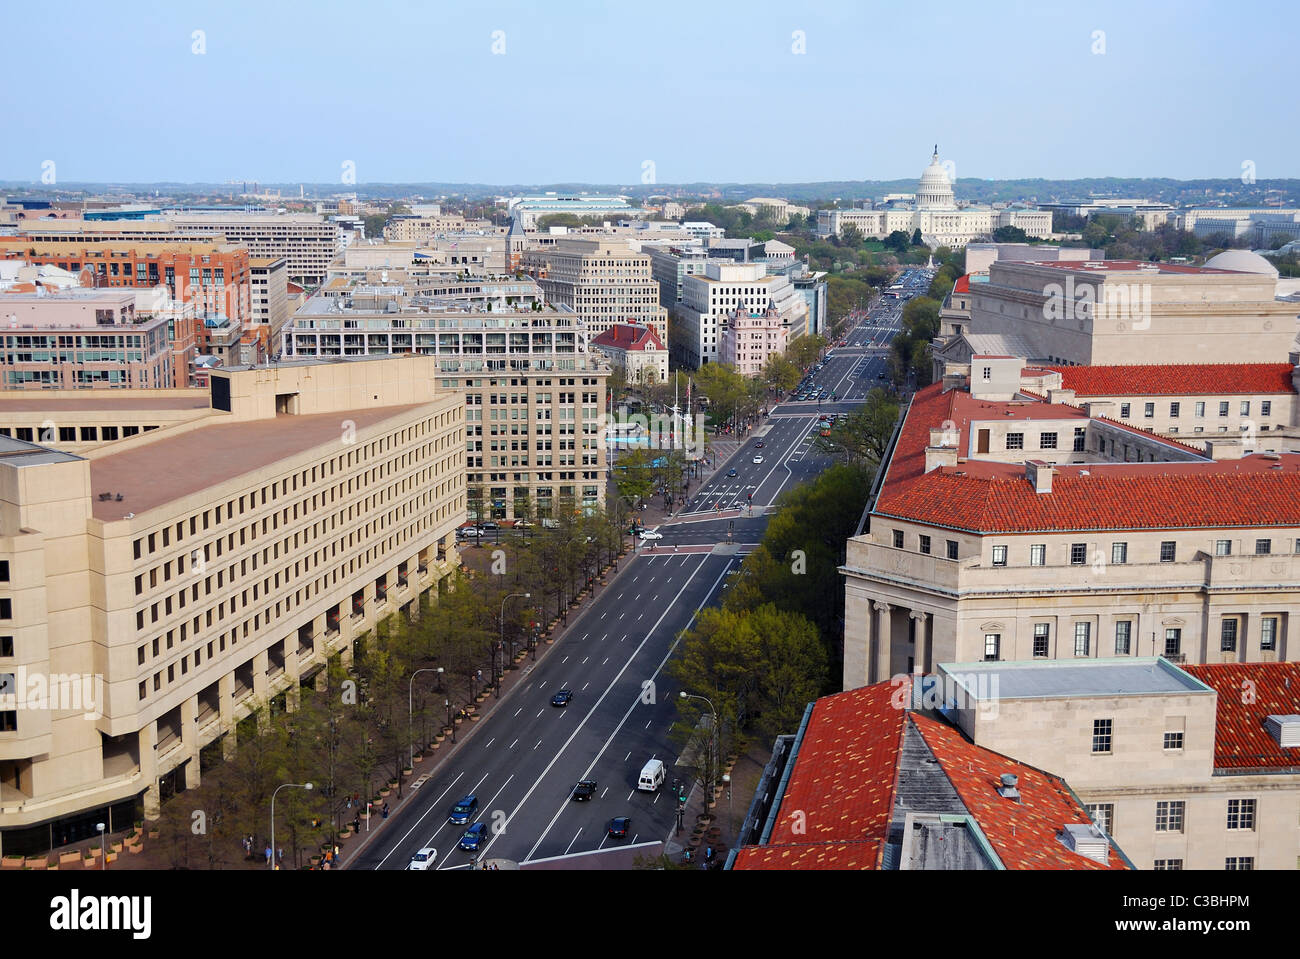 Washington DC skyline with government buildings and capitol hill on Pennsylvania Avenue. Stock Photo